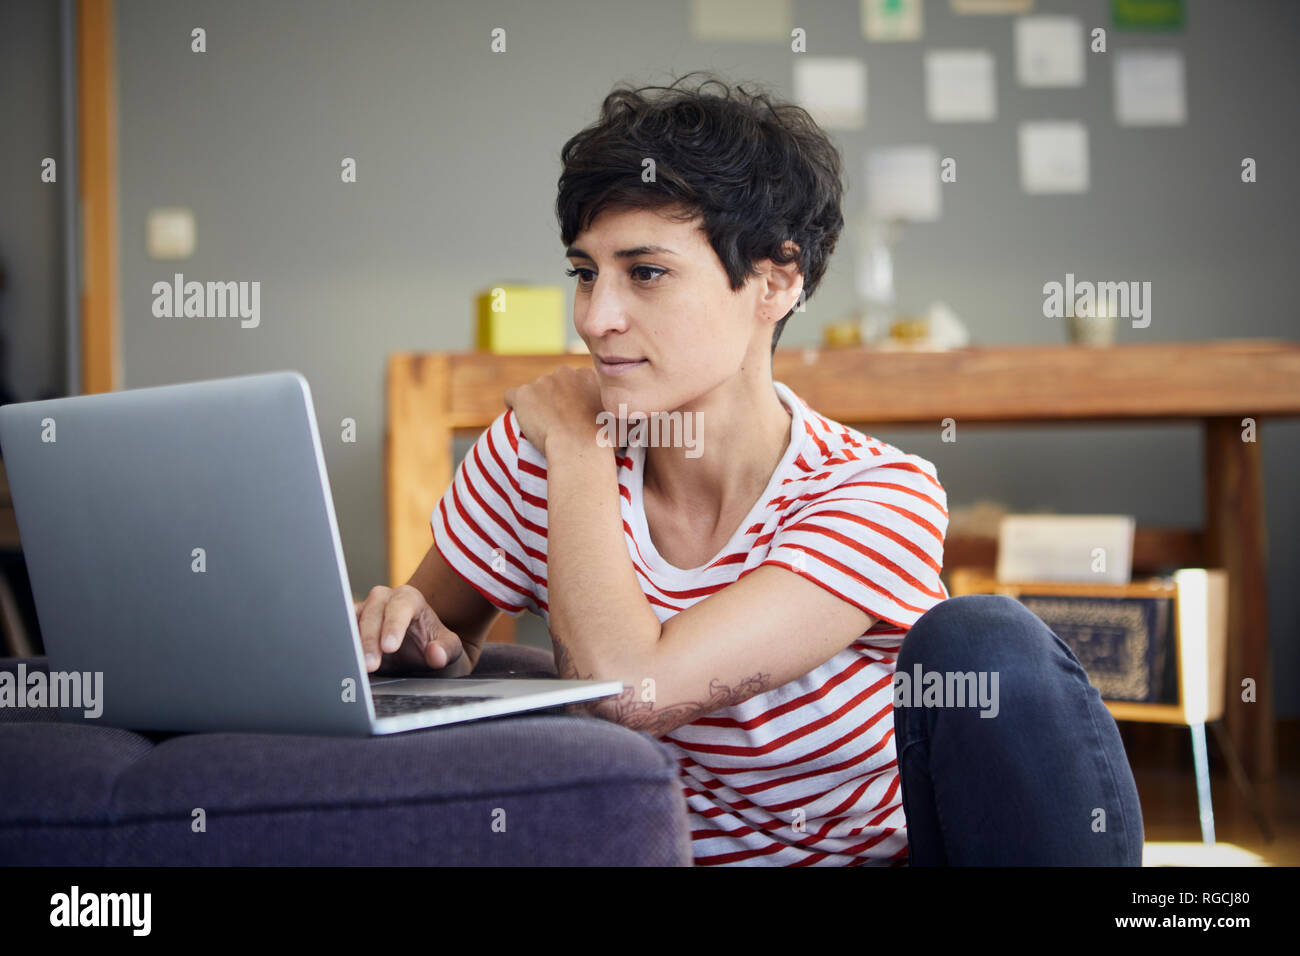 Smiling woman using laptop at home Stock Photo